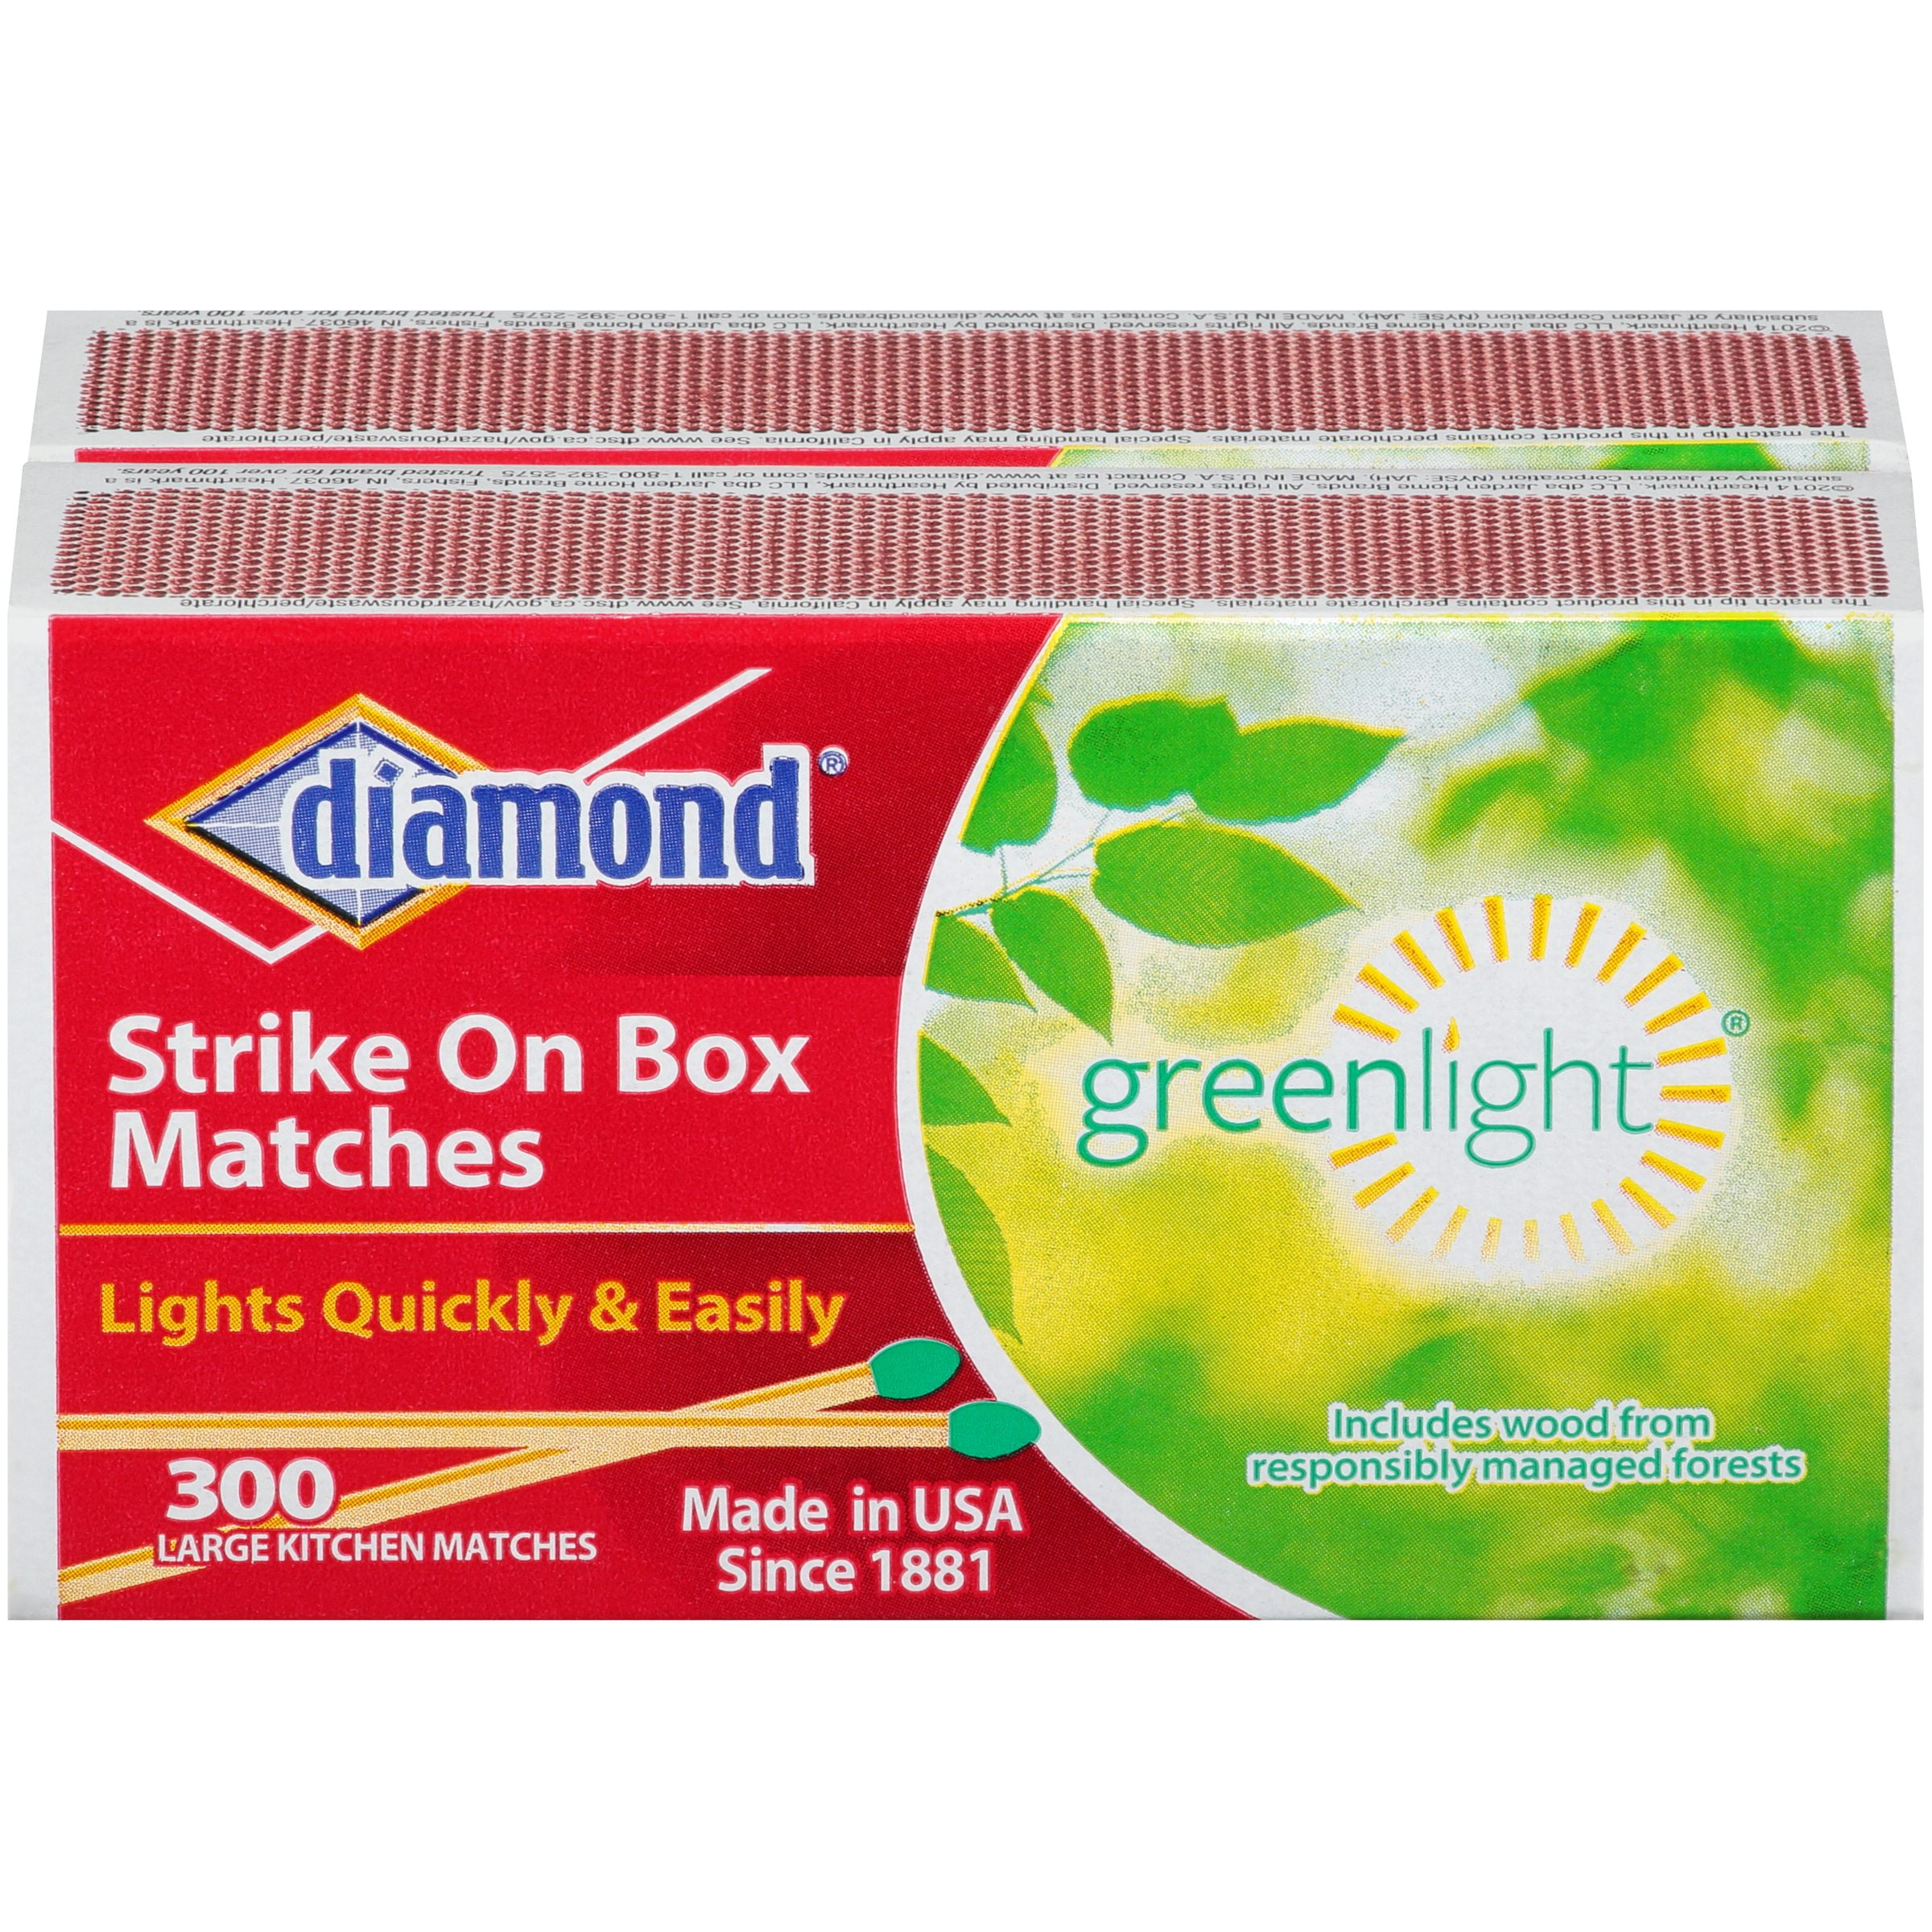 2 PACK = 600 count Diamond Strike On Box Kitchen Matches 300 count 